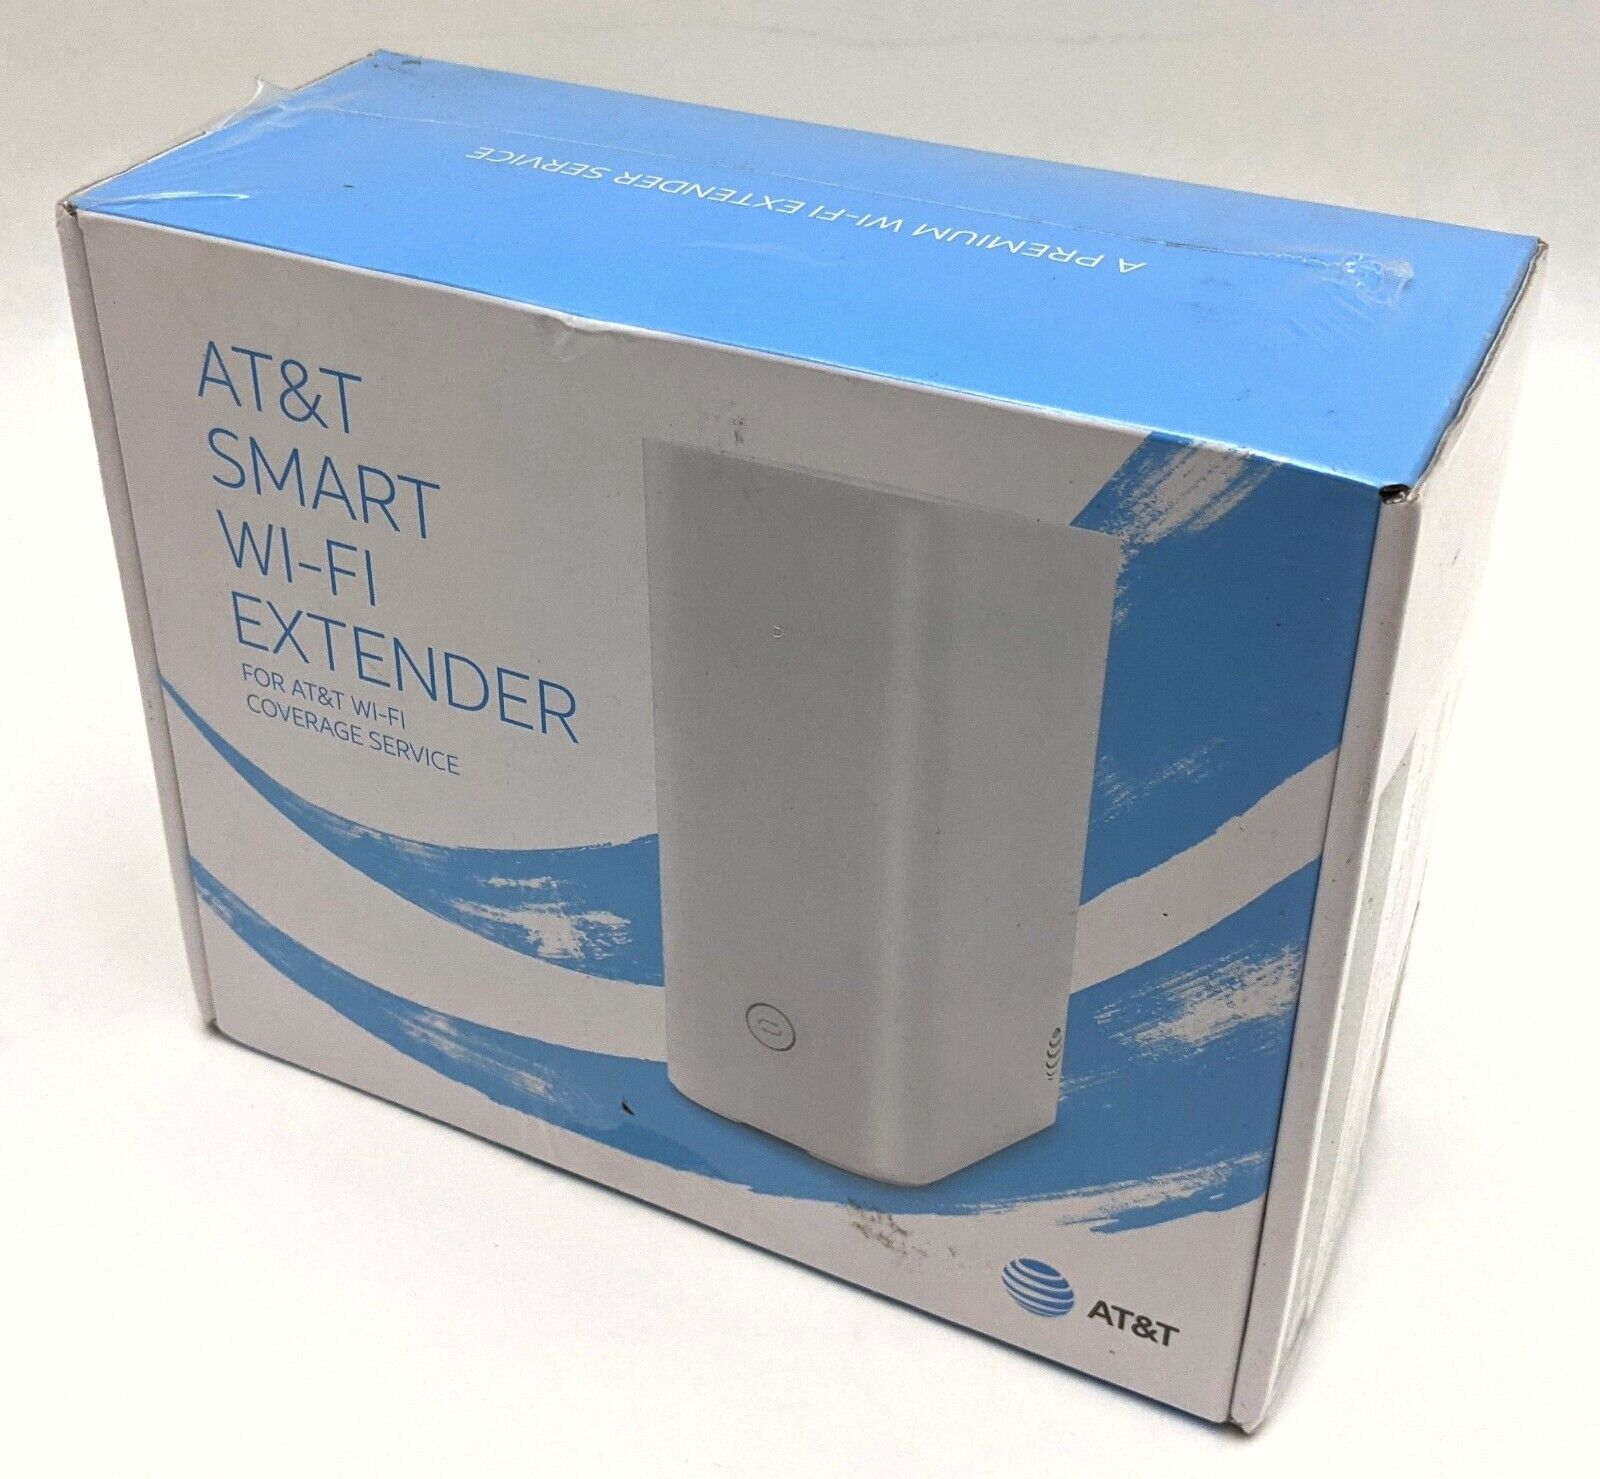 AirTies Air 4921 Smart AT&T Wi-Fi Extender Wireless Access Point 1600Mbps Dual